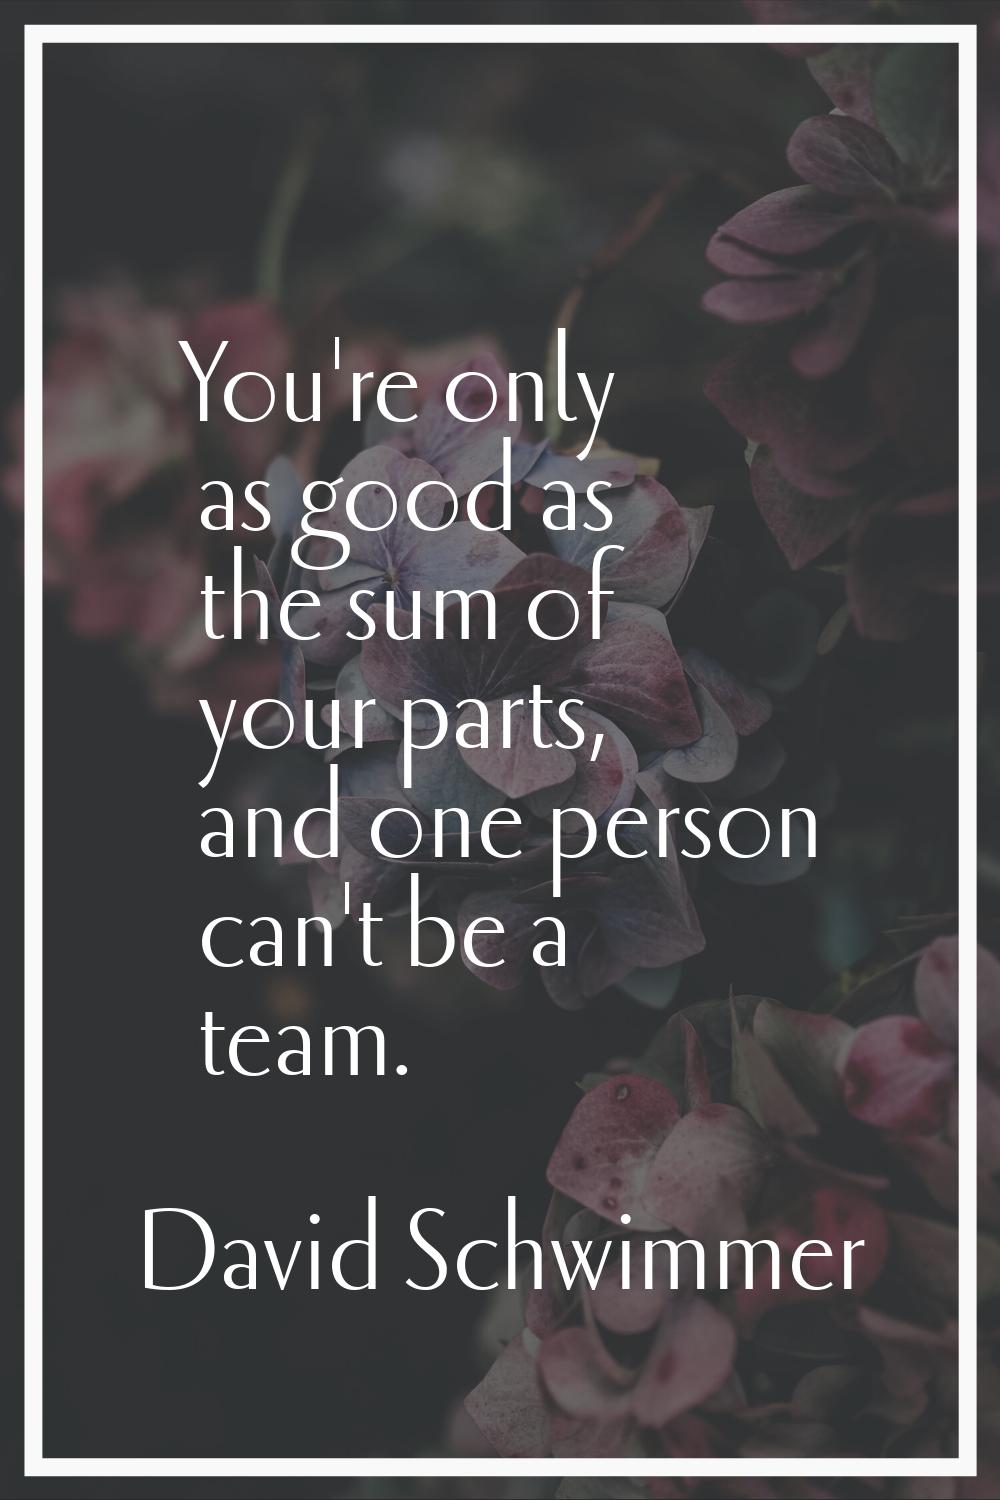 You're only as good as the sum of your parts, and one person can't be a team.